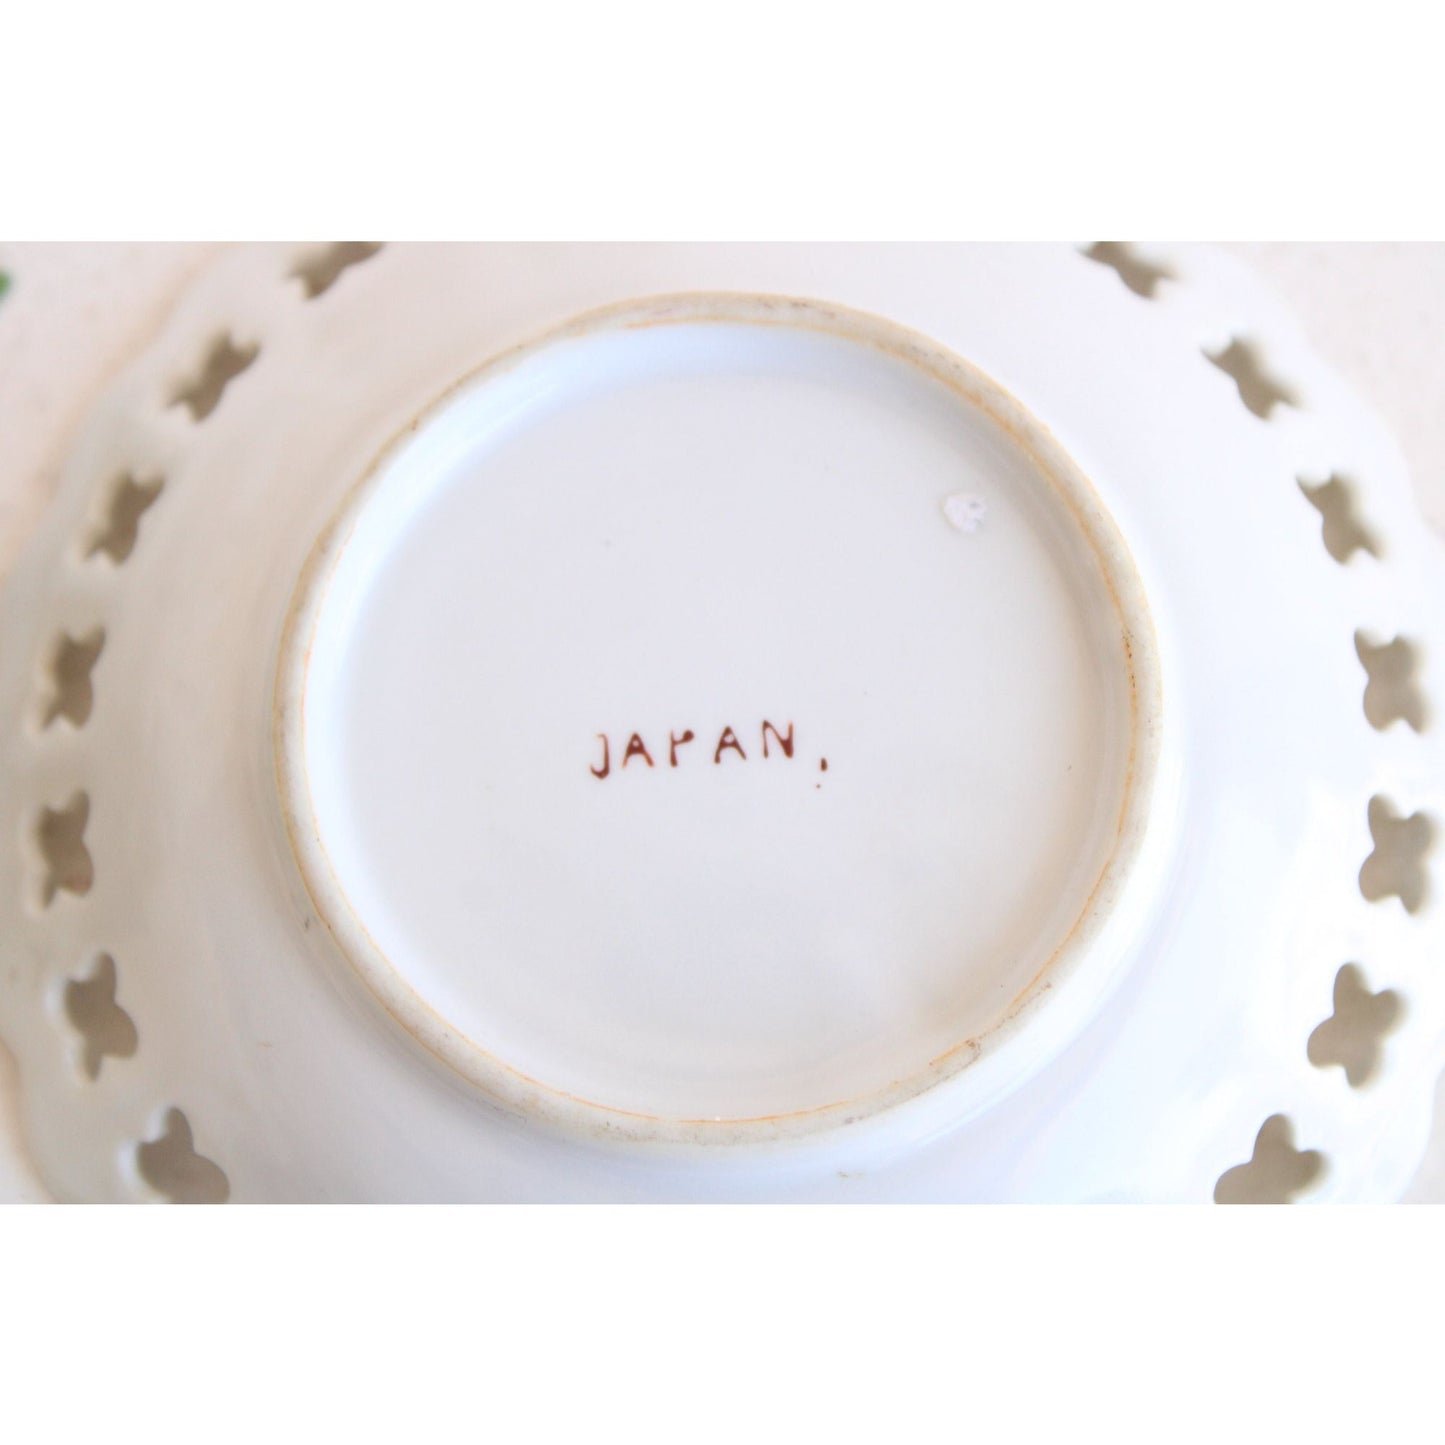 Vintage 1940s Japanese Hand Painted Small Trinket Bowl